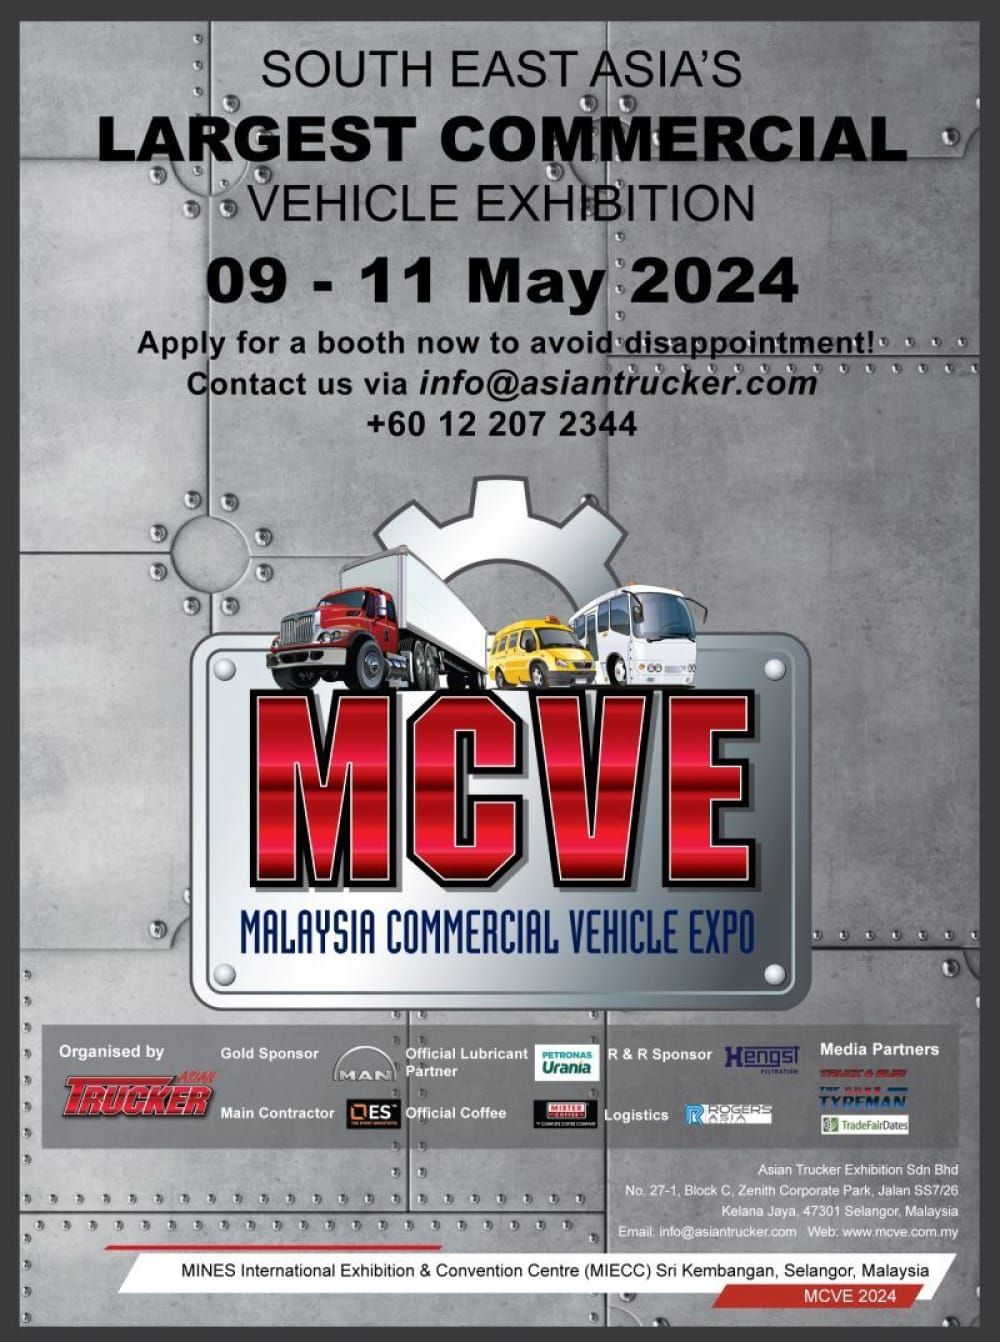 Malaysia Commercial Vehicle Expo 2024